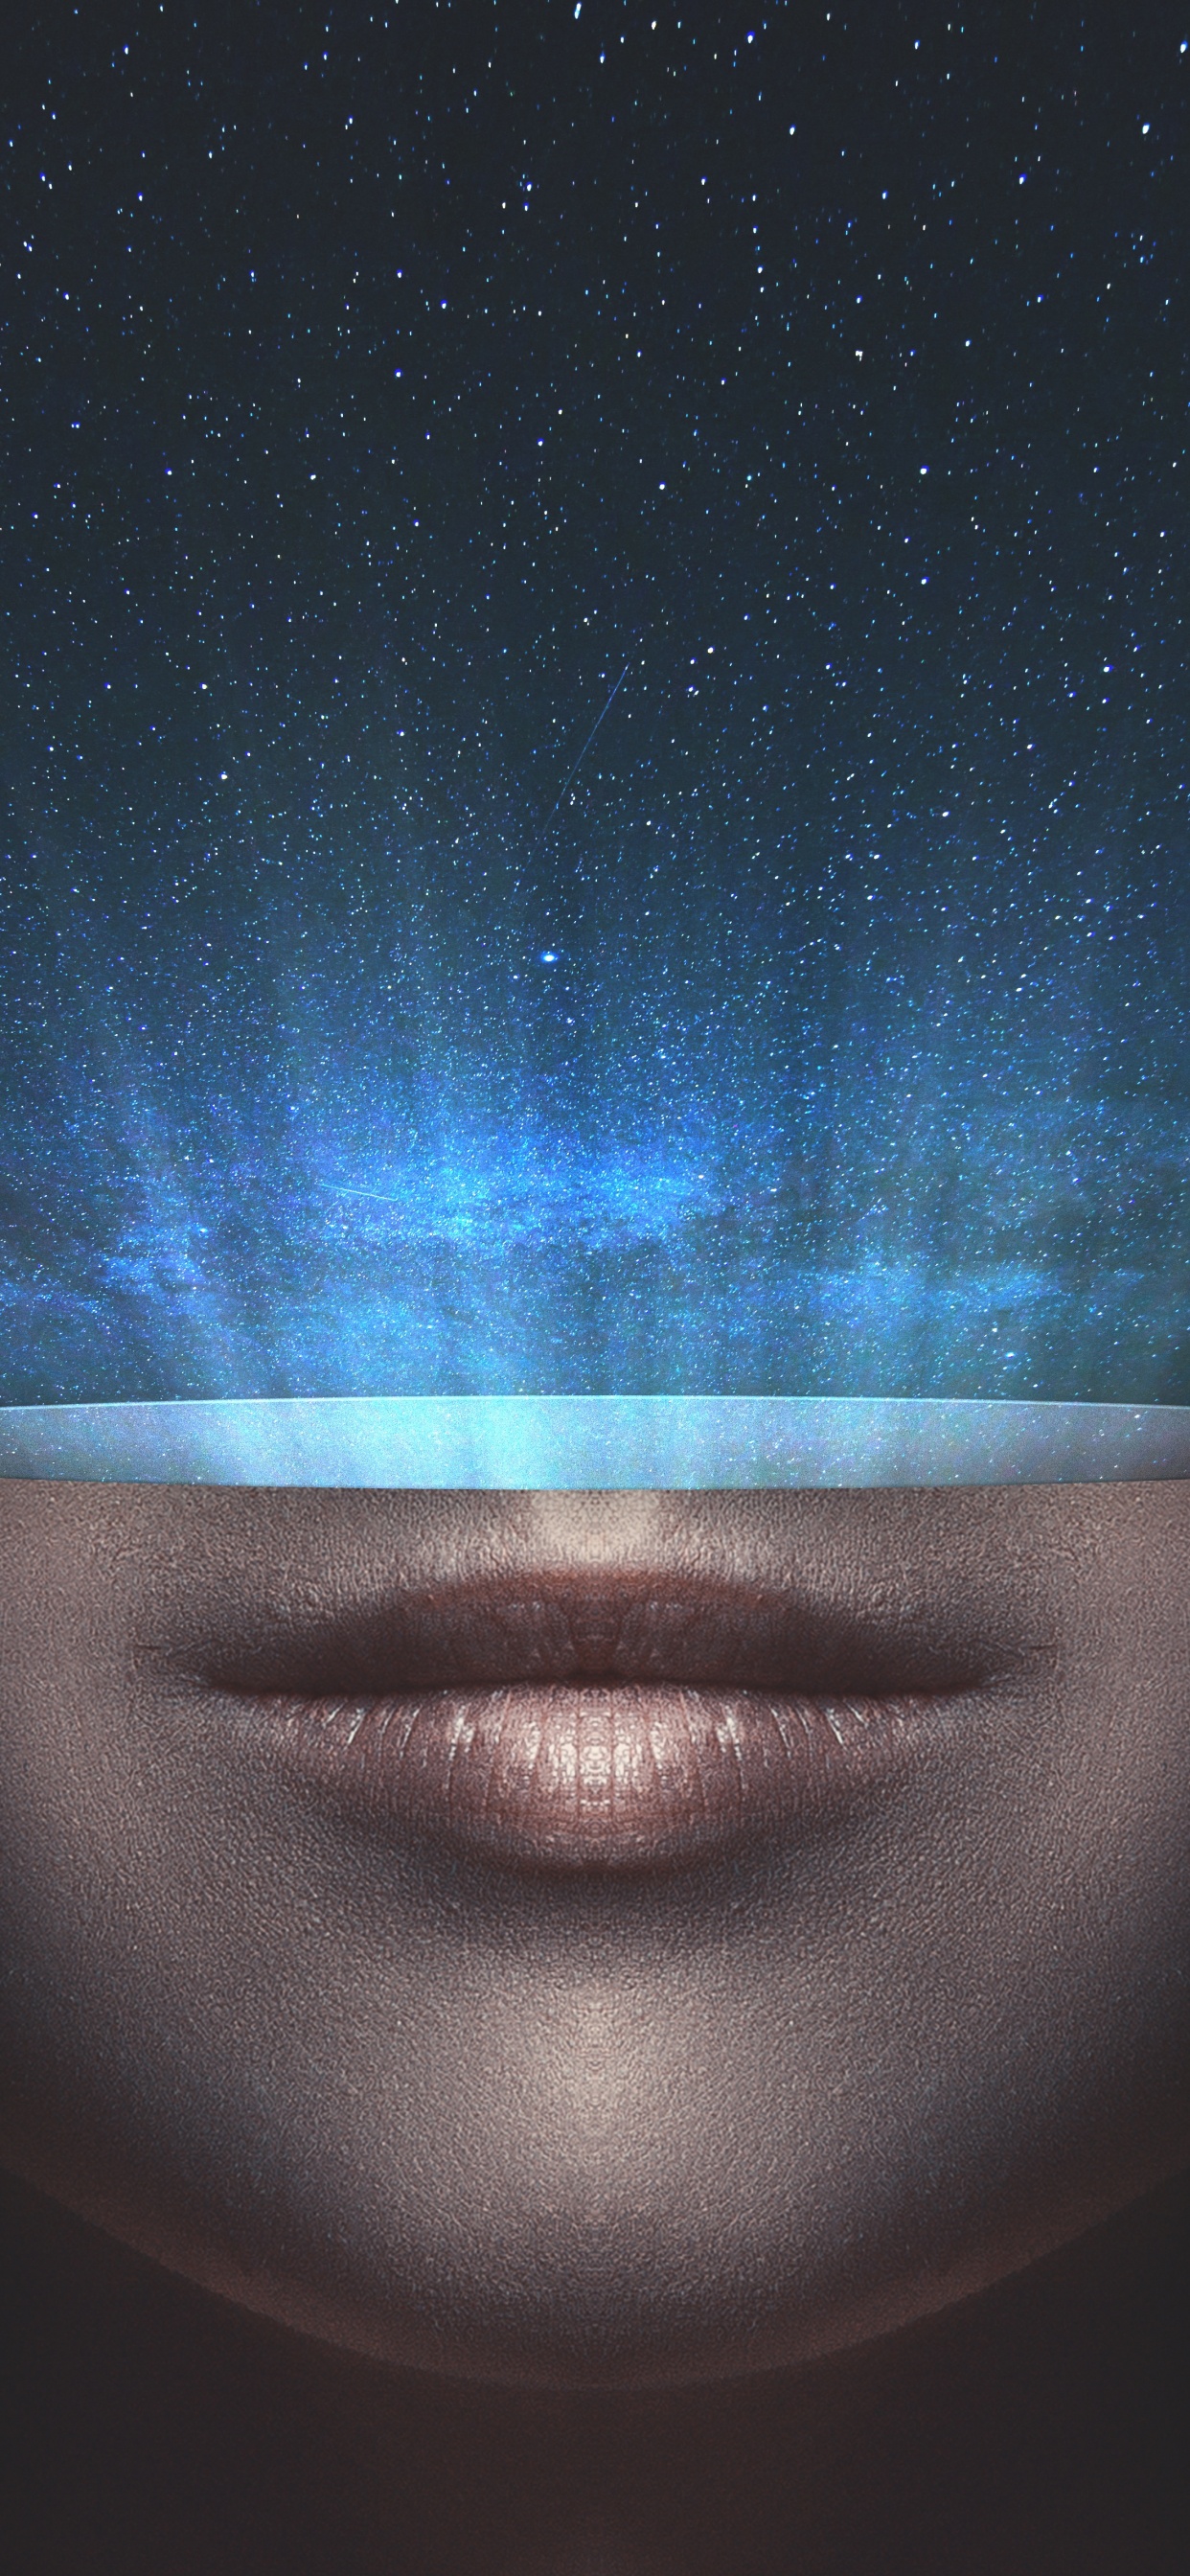 Persons Face With Blue and White Stars. Wallpaper in 1242x2688 Resolution